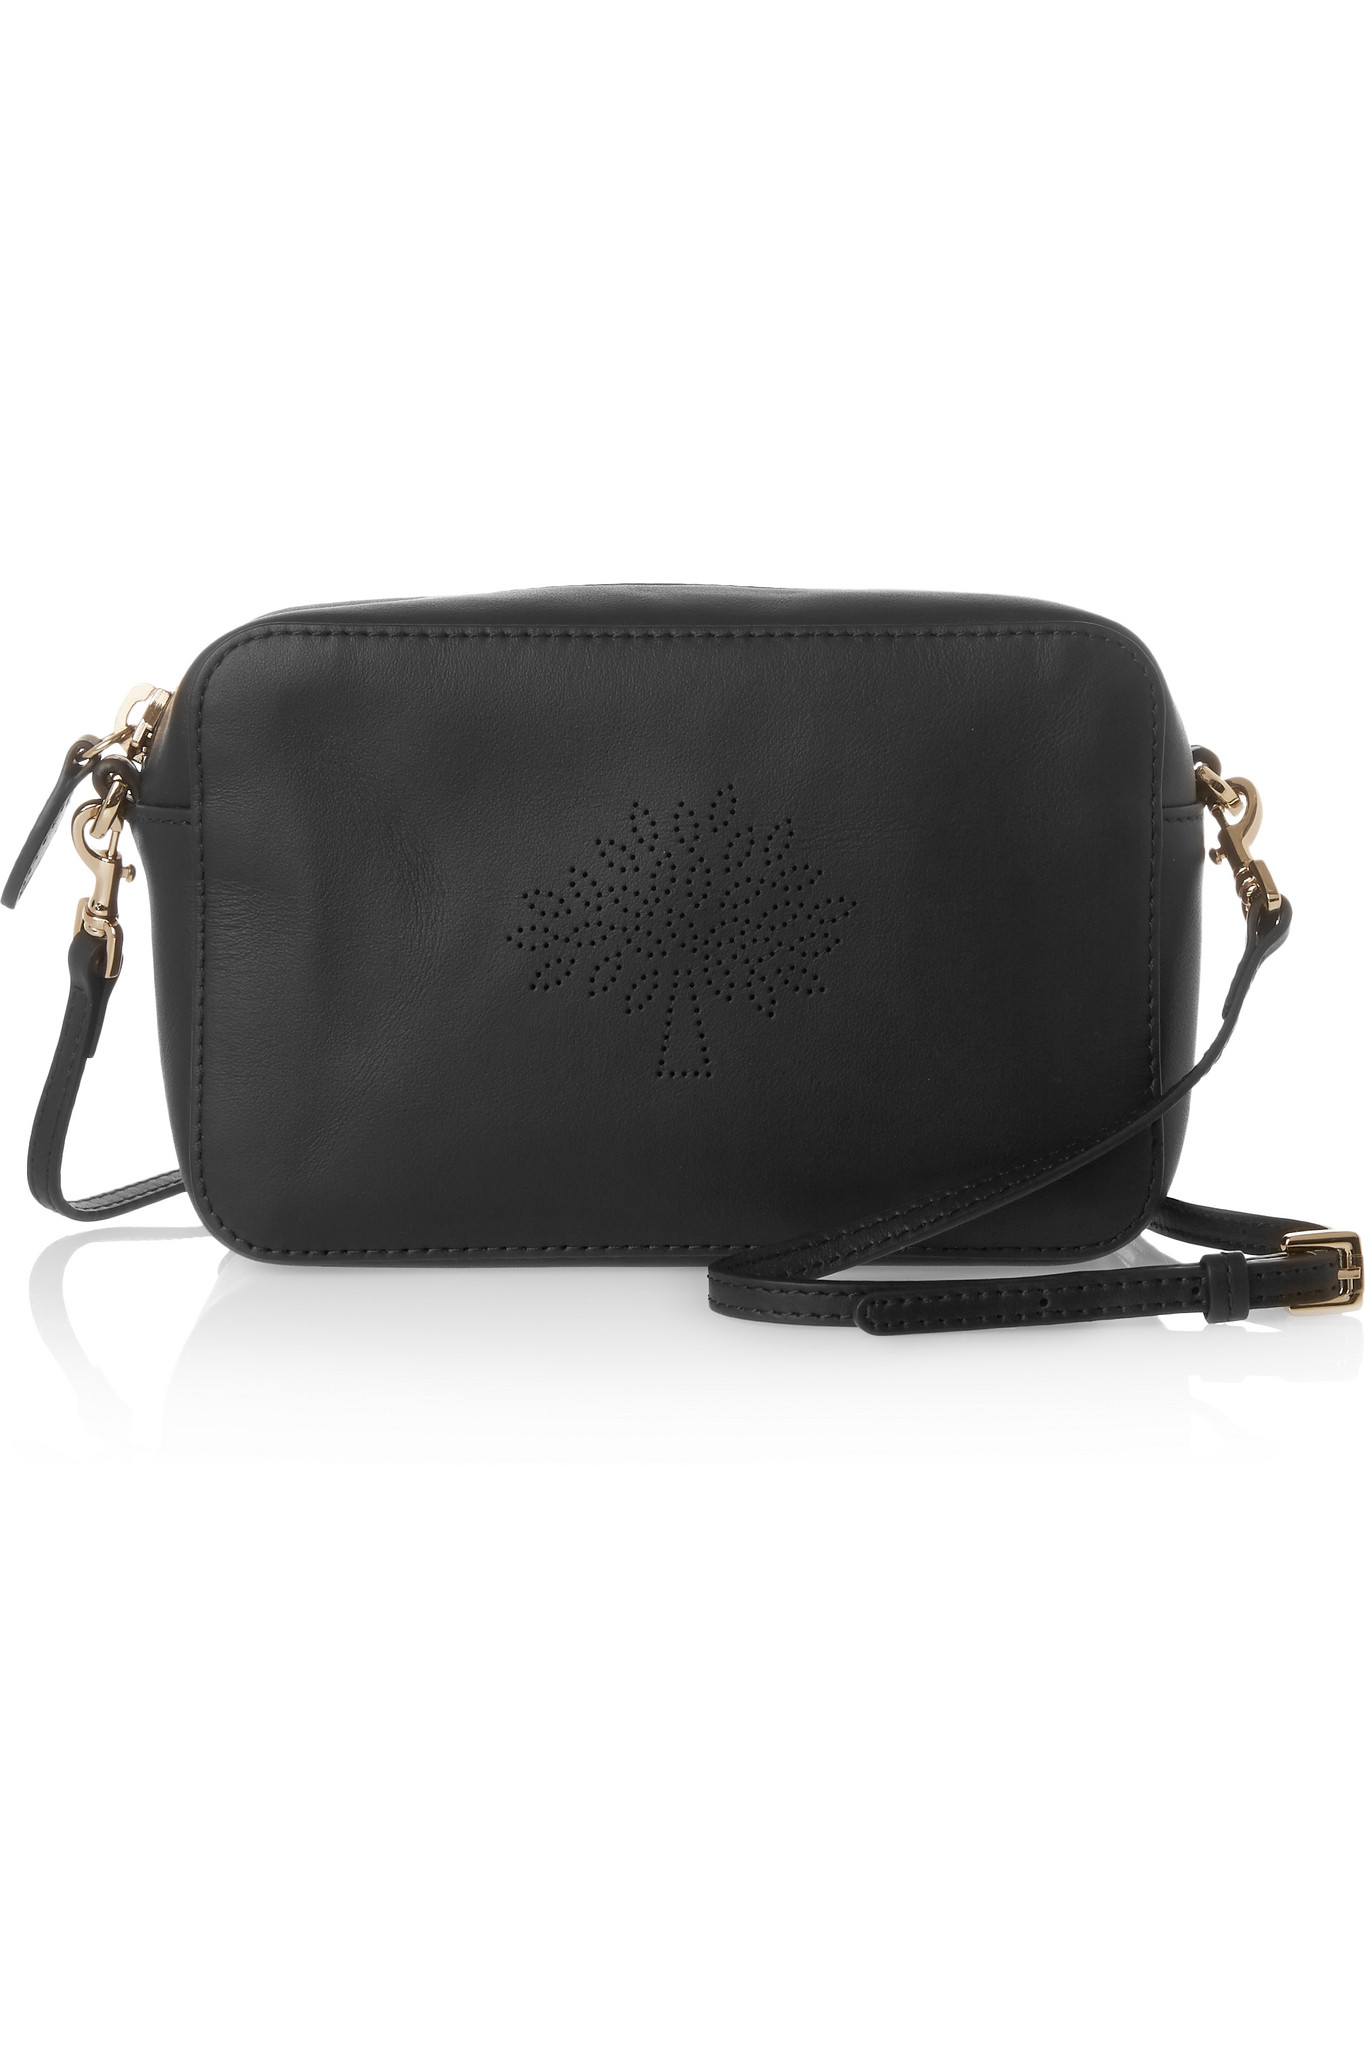 Mulberry Blossom Perforated Leather Shoulder Bag in Black - Lyst